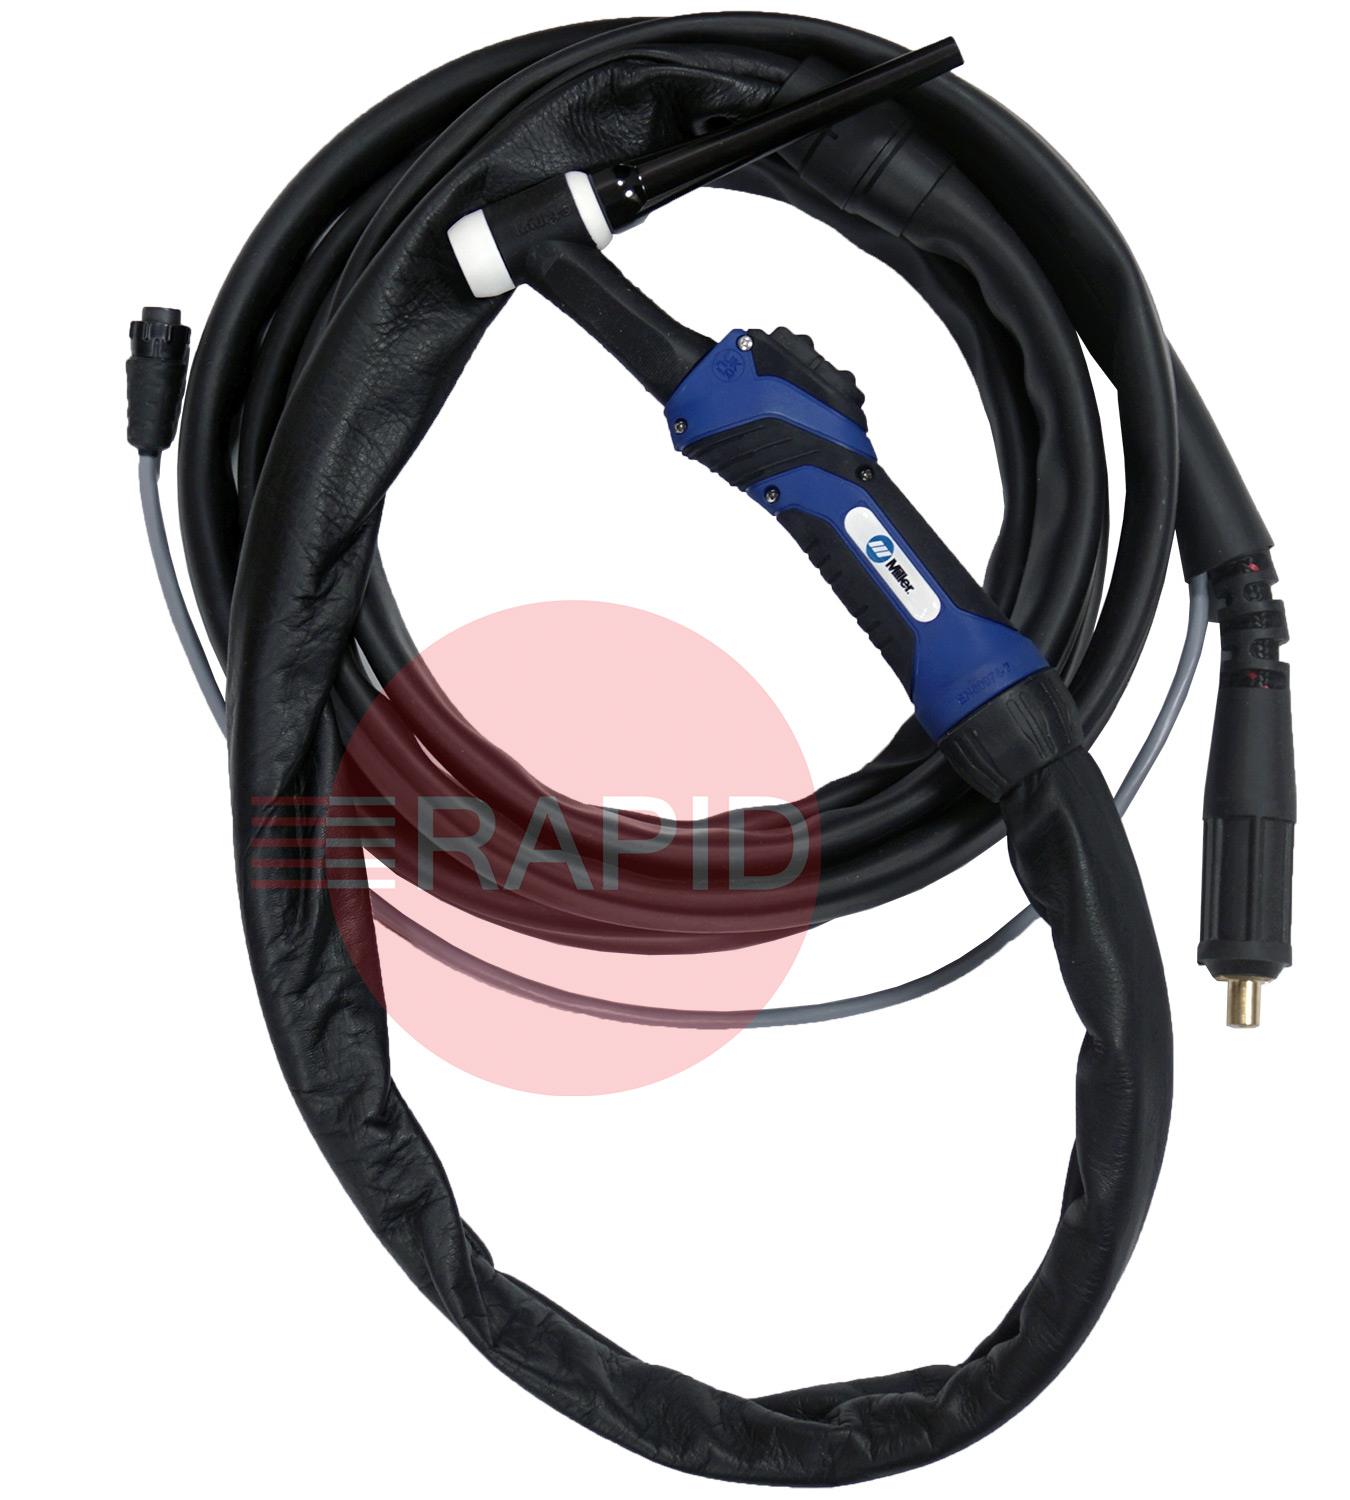 058022022  Miller Eurotorch A-150 4m Tig Torch WP17 Style with 6 Pin Miller Plug & 10-25 Dinse Connector